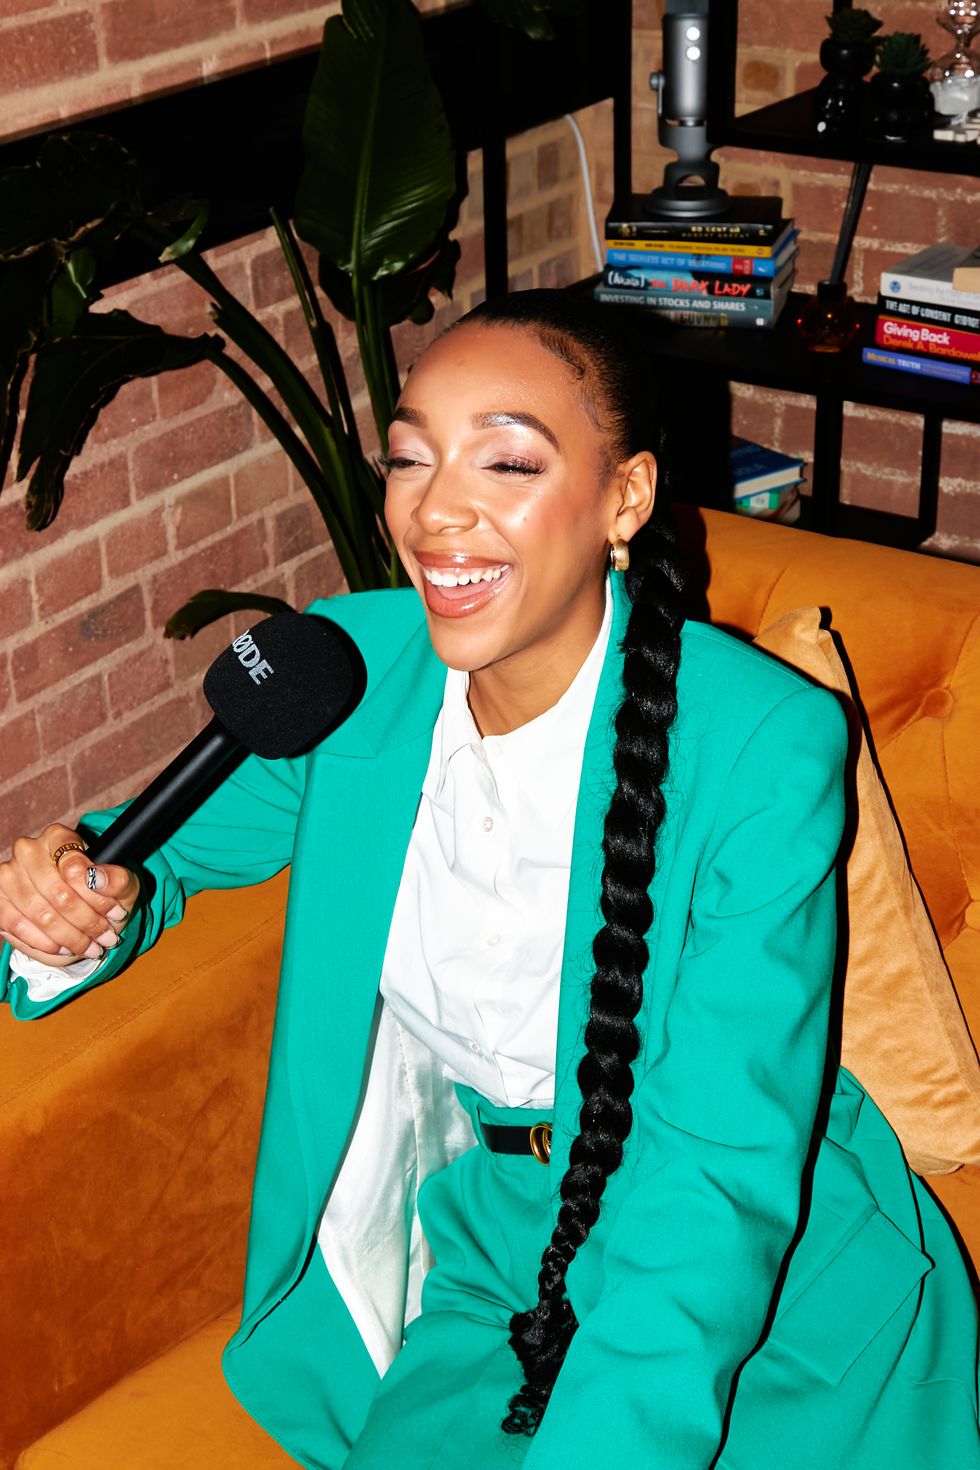 shola west pictured in green formal suit she smiles as she speaks into a microphone